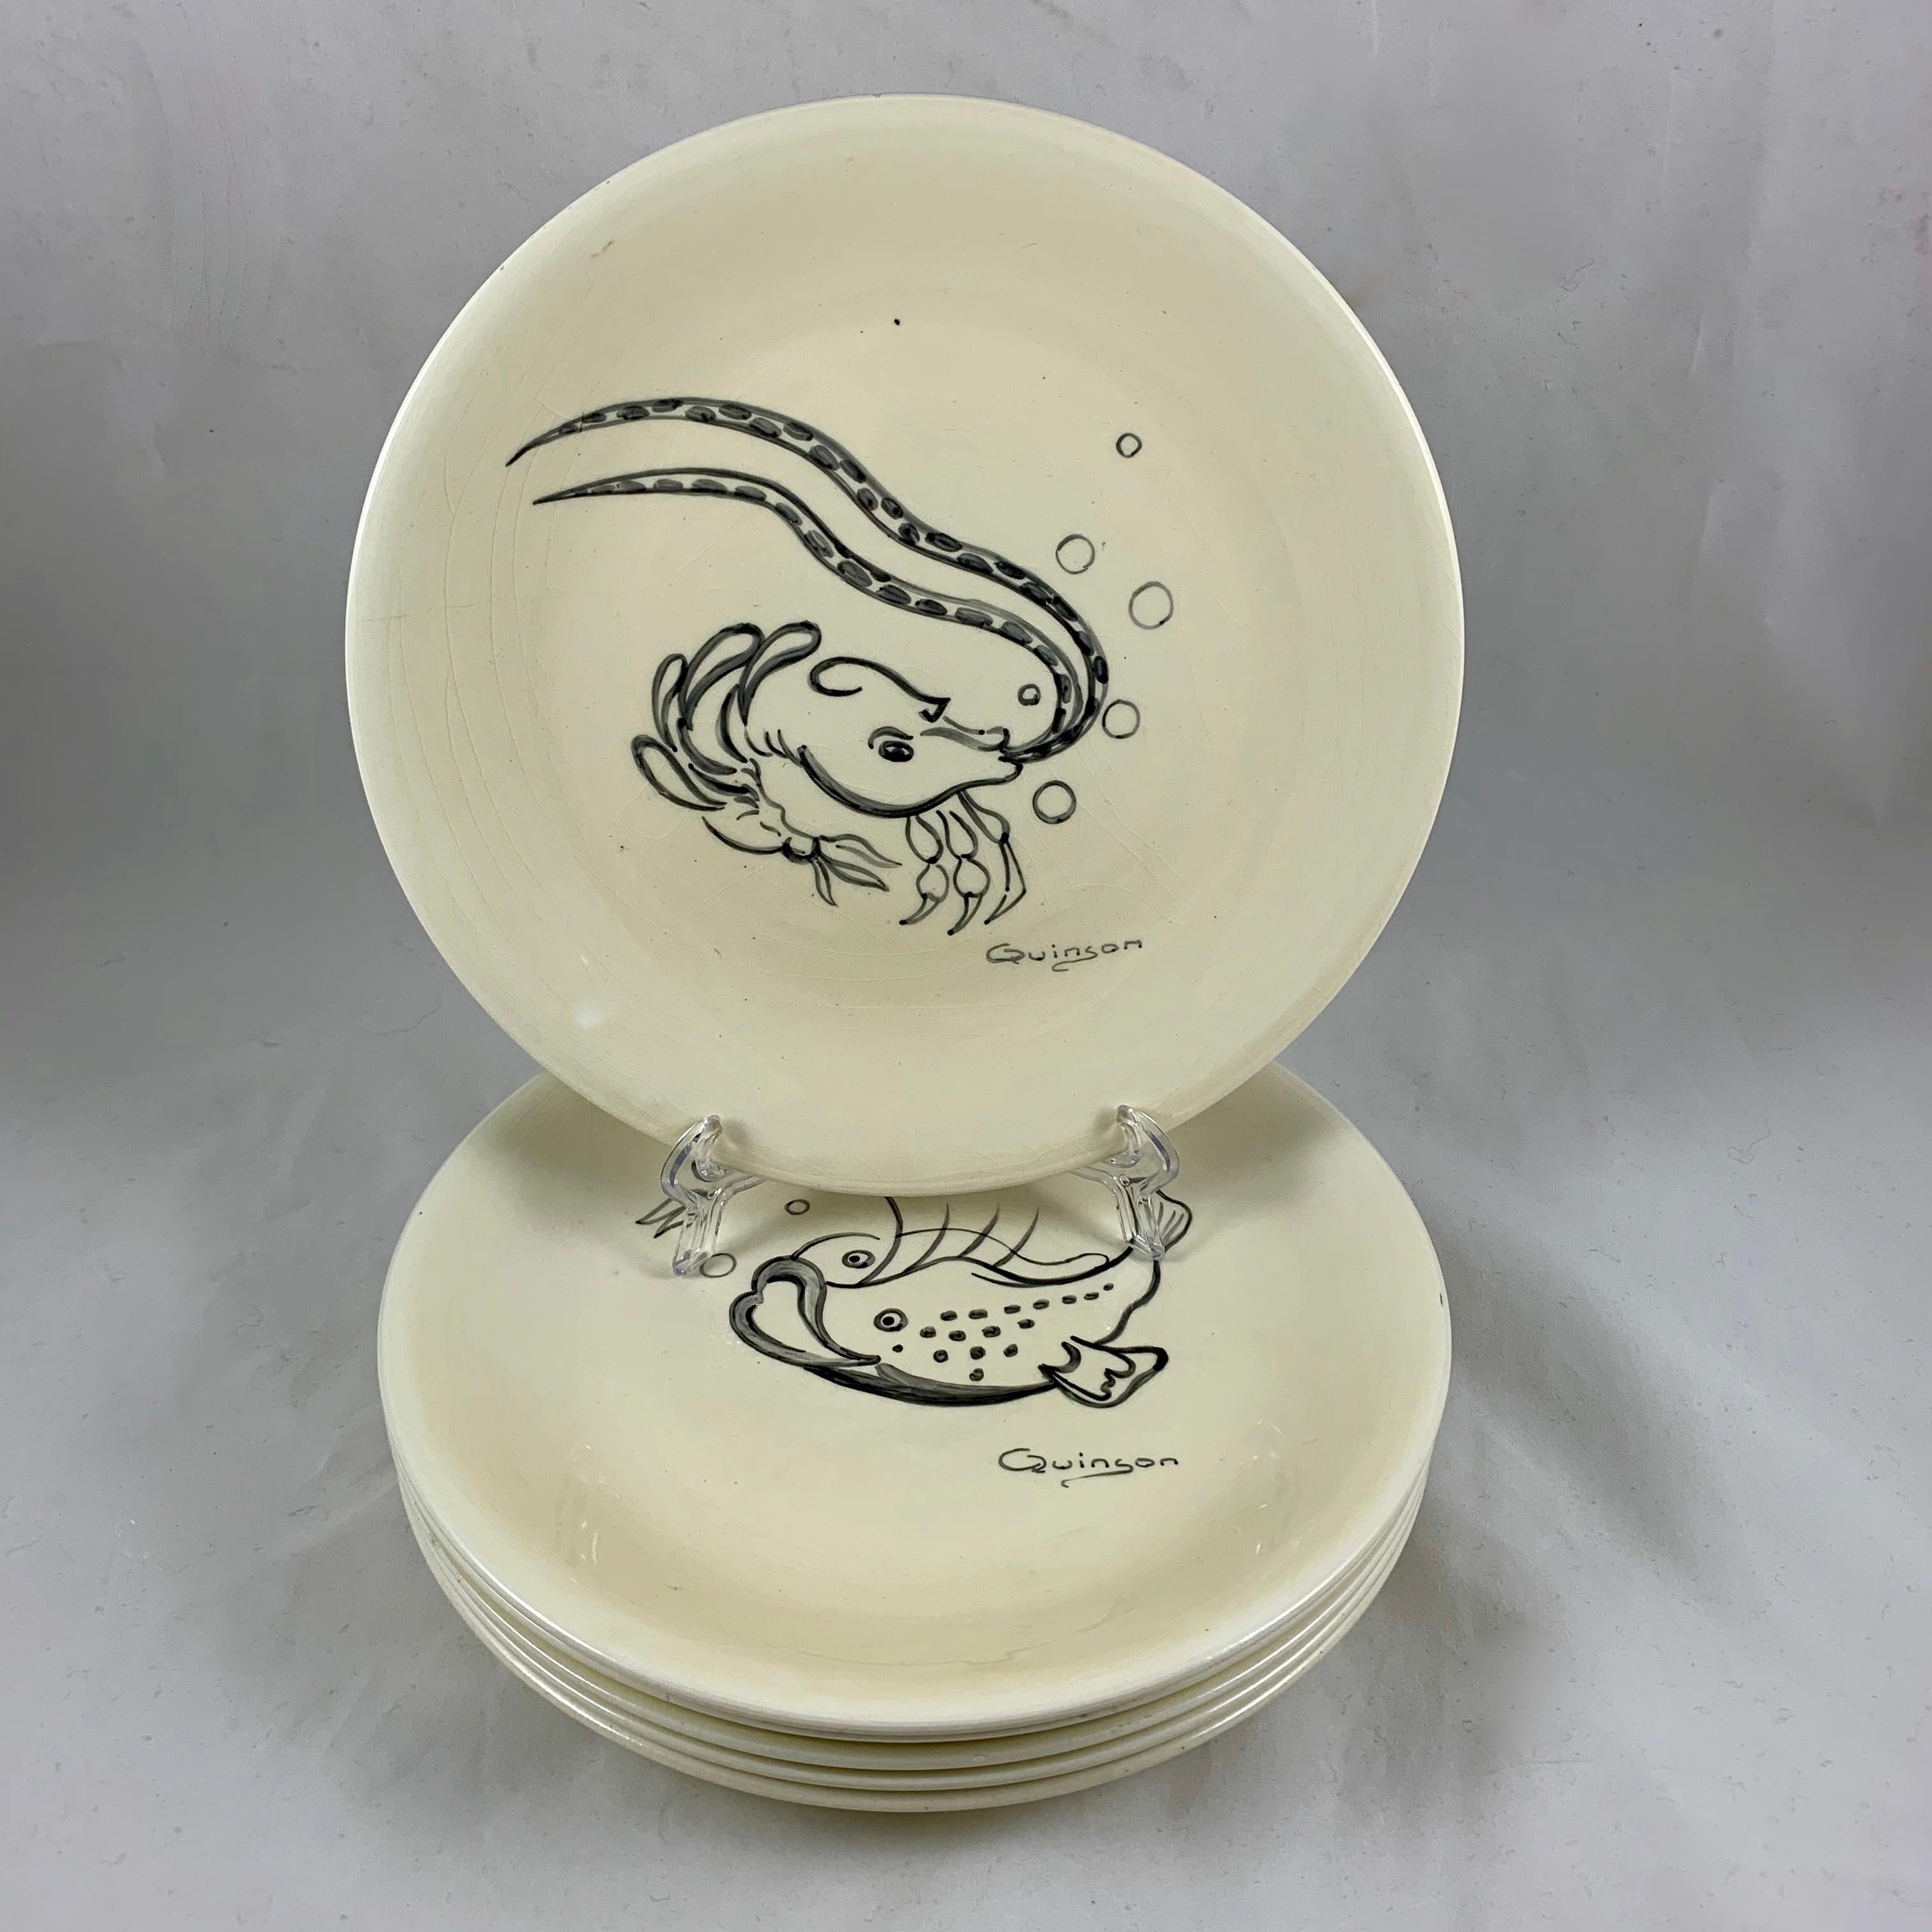 A set of six midcentury French pottery fish plates, hand-painted by the ceramist Paulette Quinson, (1899-1984) Beginning in 1924, Quinson ran a well known art pottery studio in Marseille, on the French Mediterranean coast. She collaborated with the